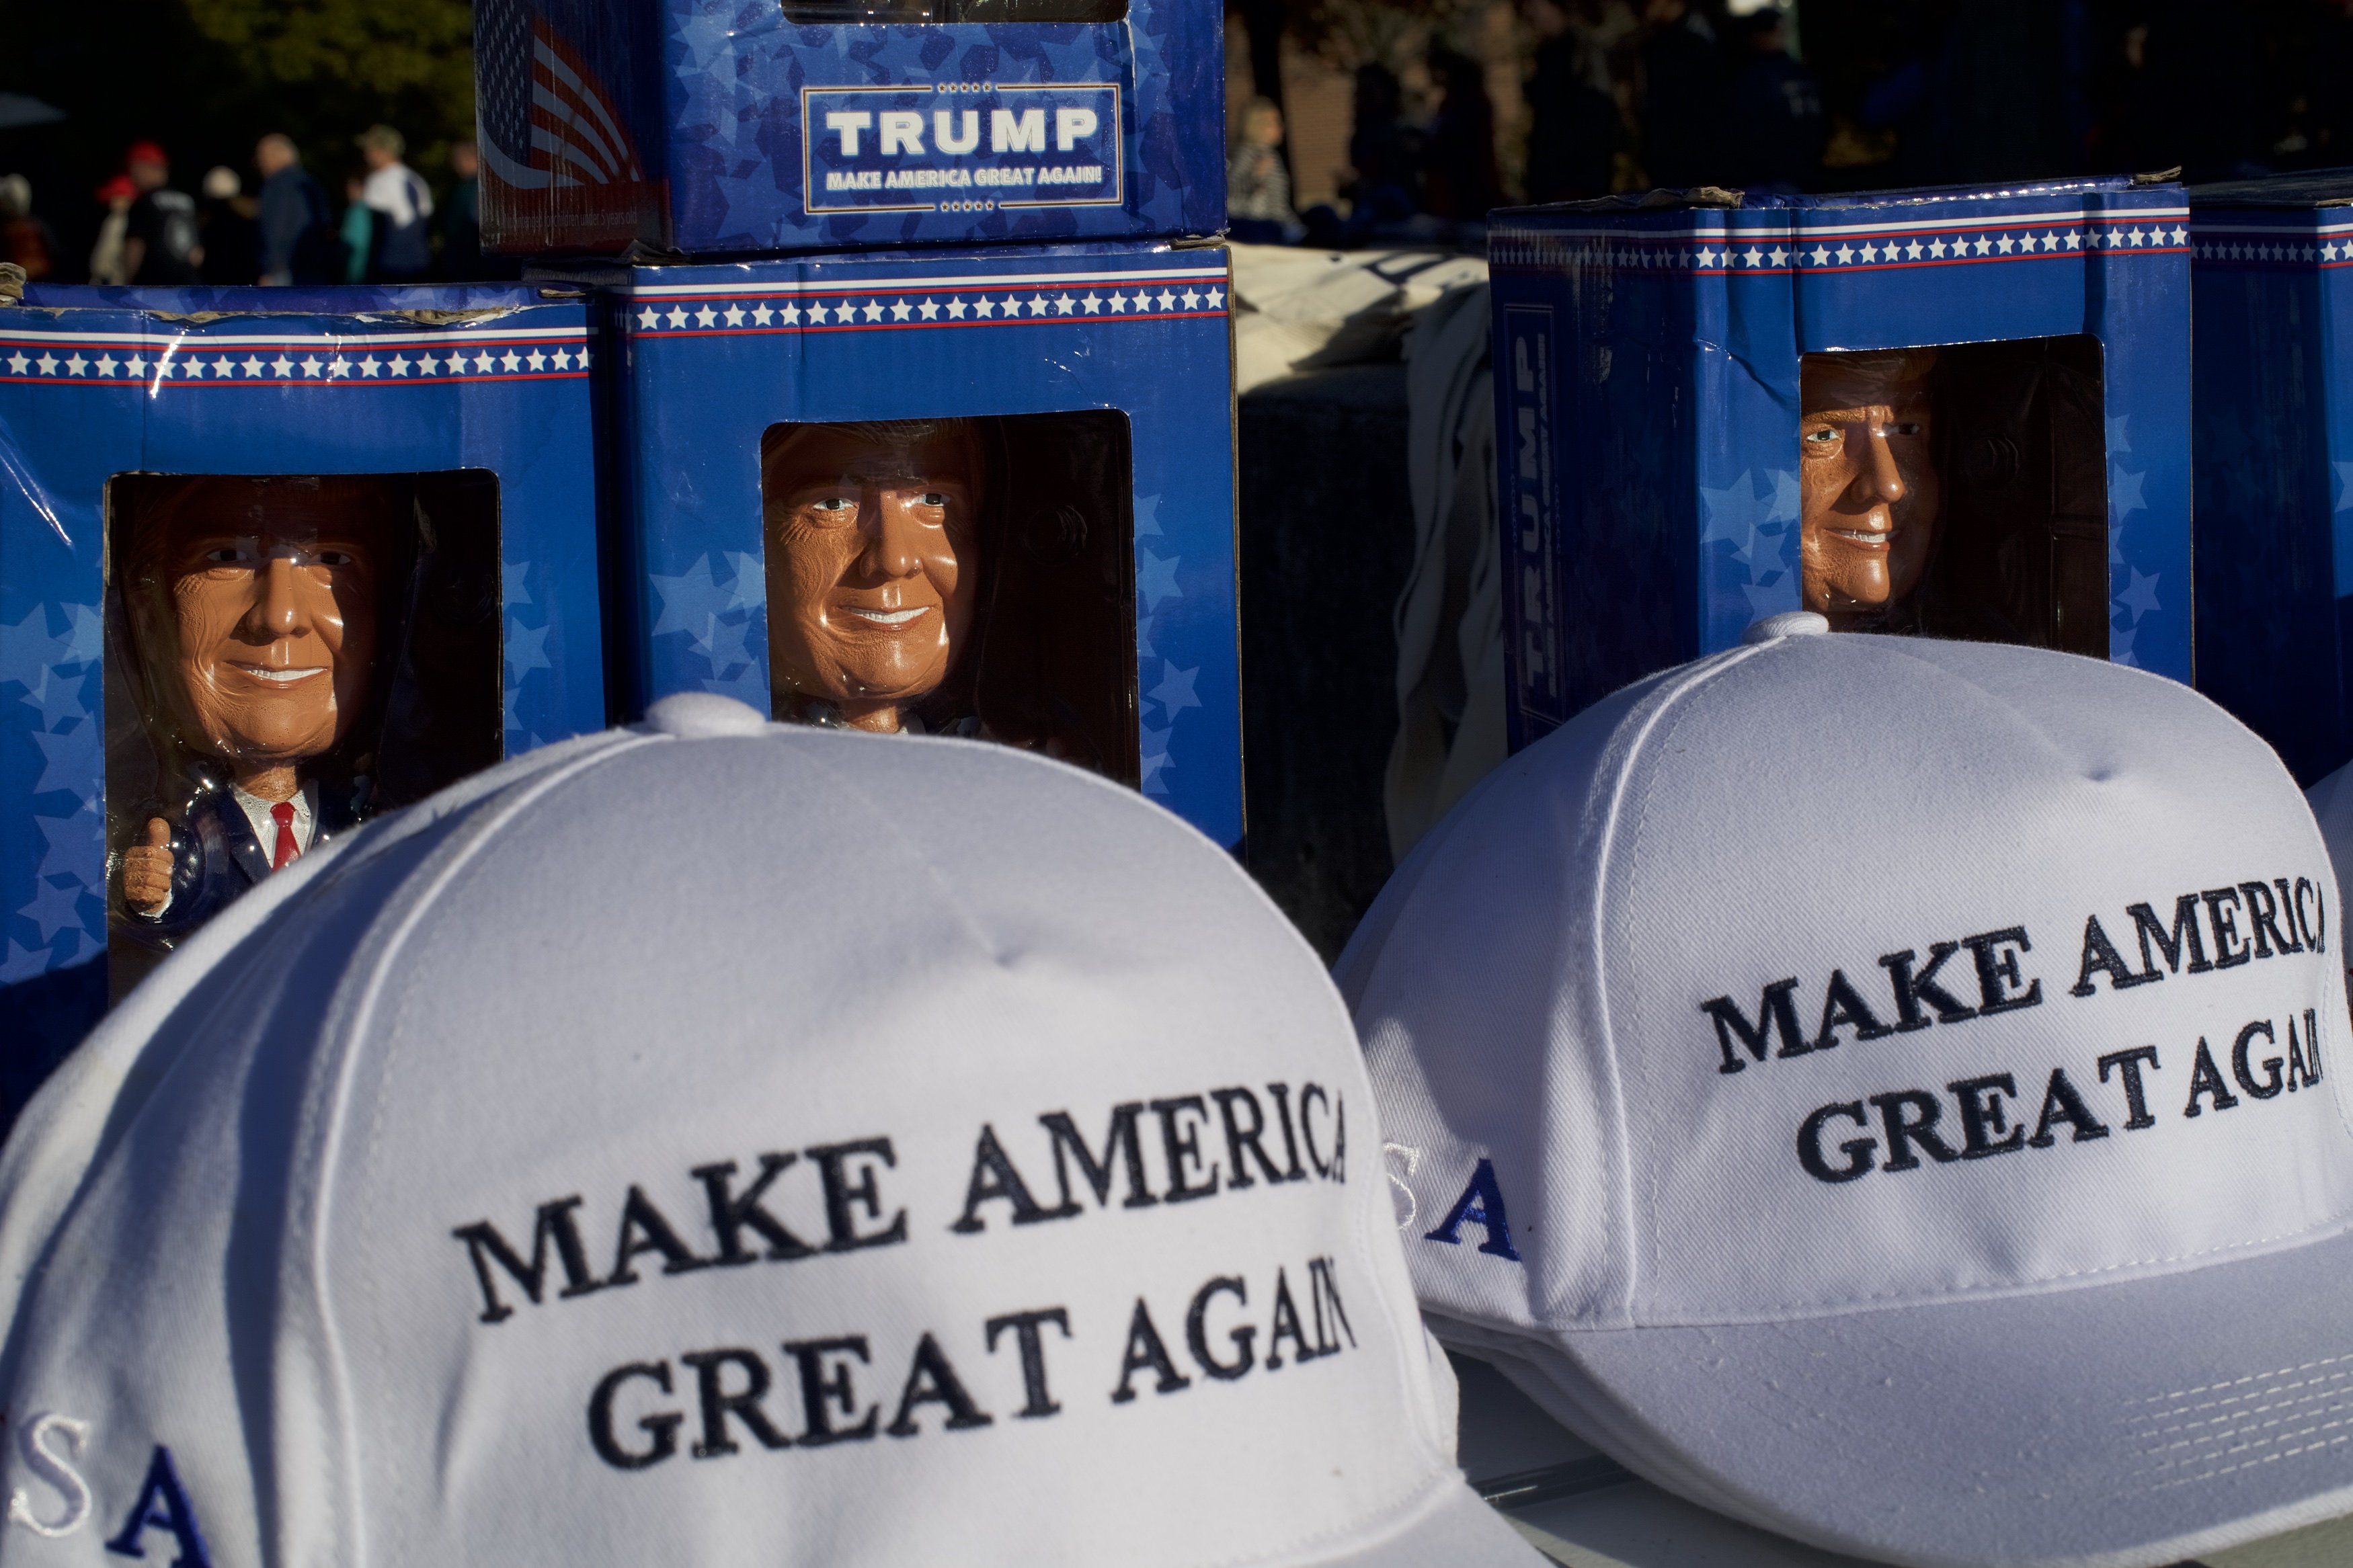 MAGA hats being sold at a campaign event in Hershey, Pennsylvania | Photo: Getty Images